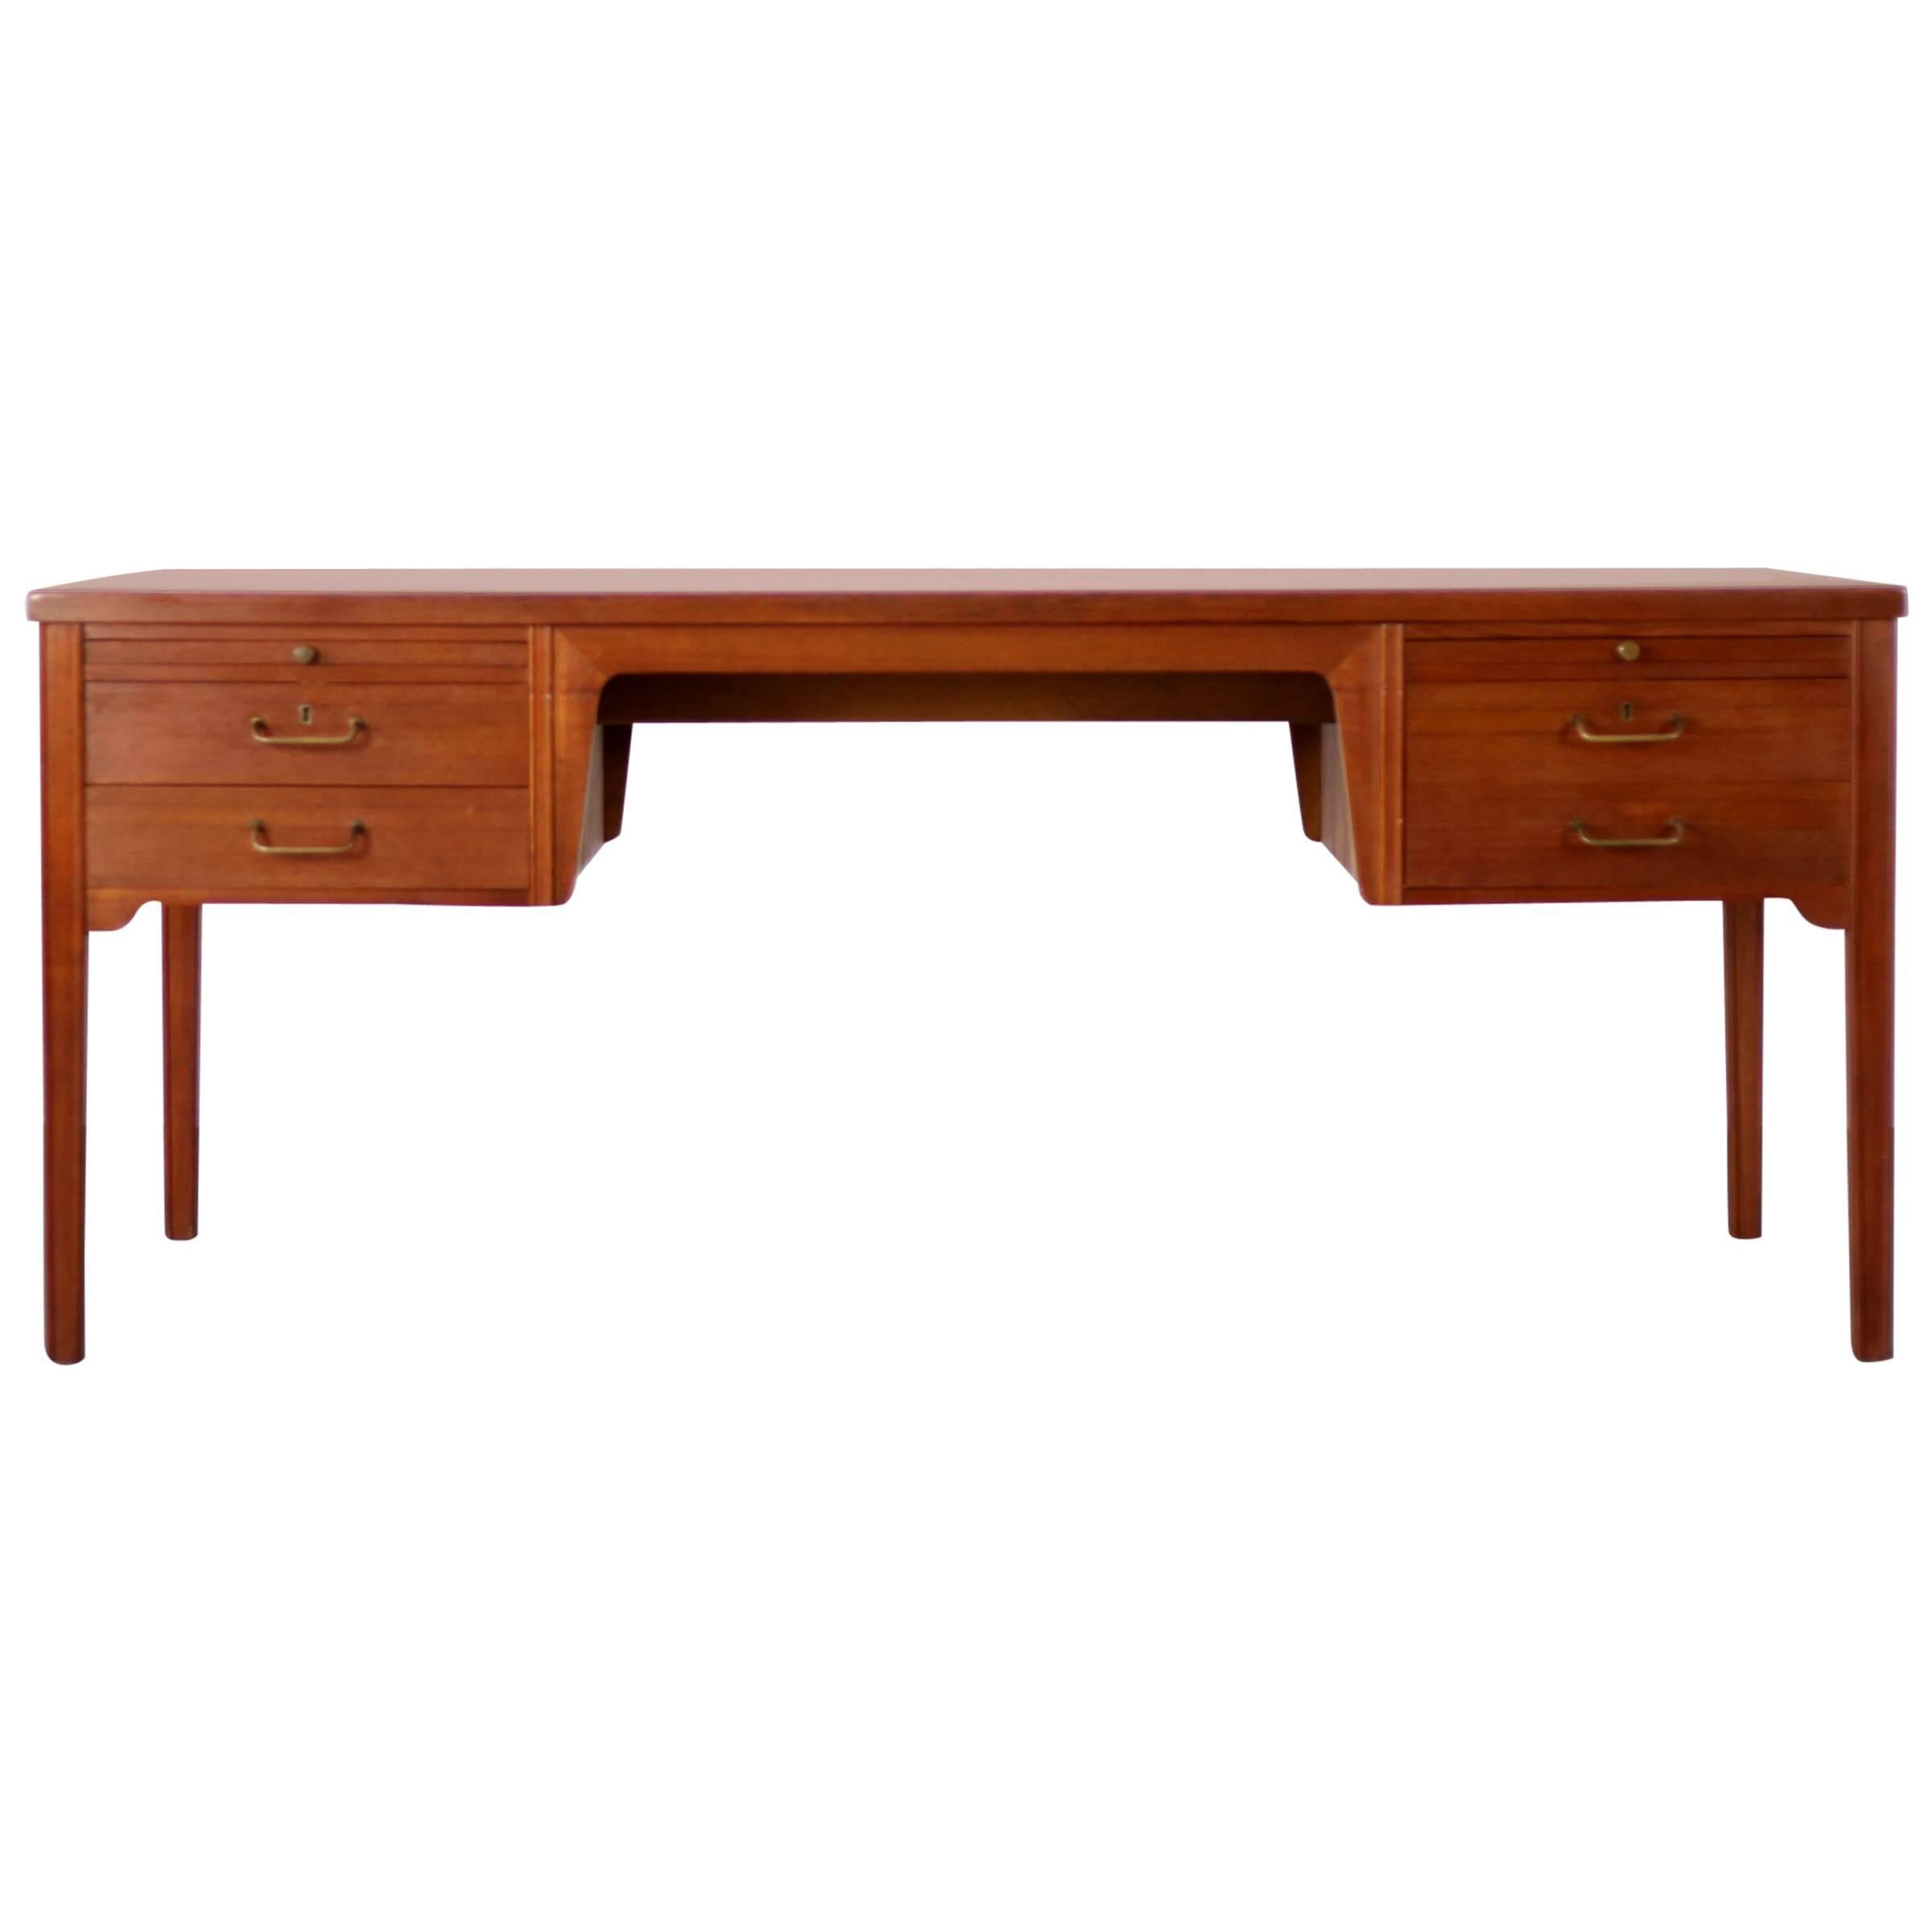 Beautifully executed Danish Modern Teak Desk from the 1950s